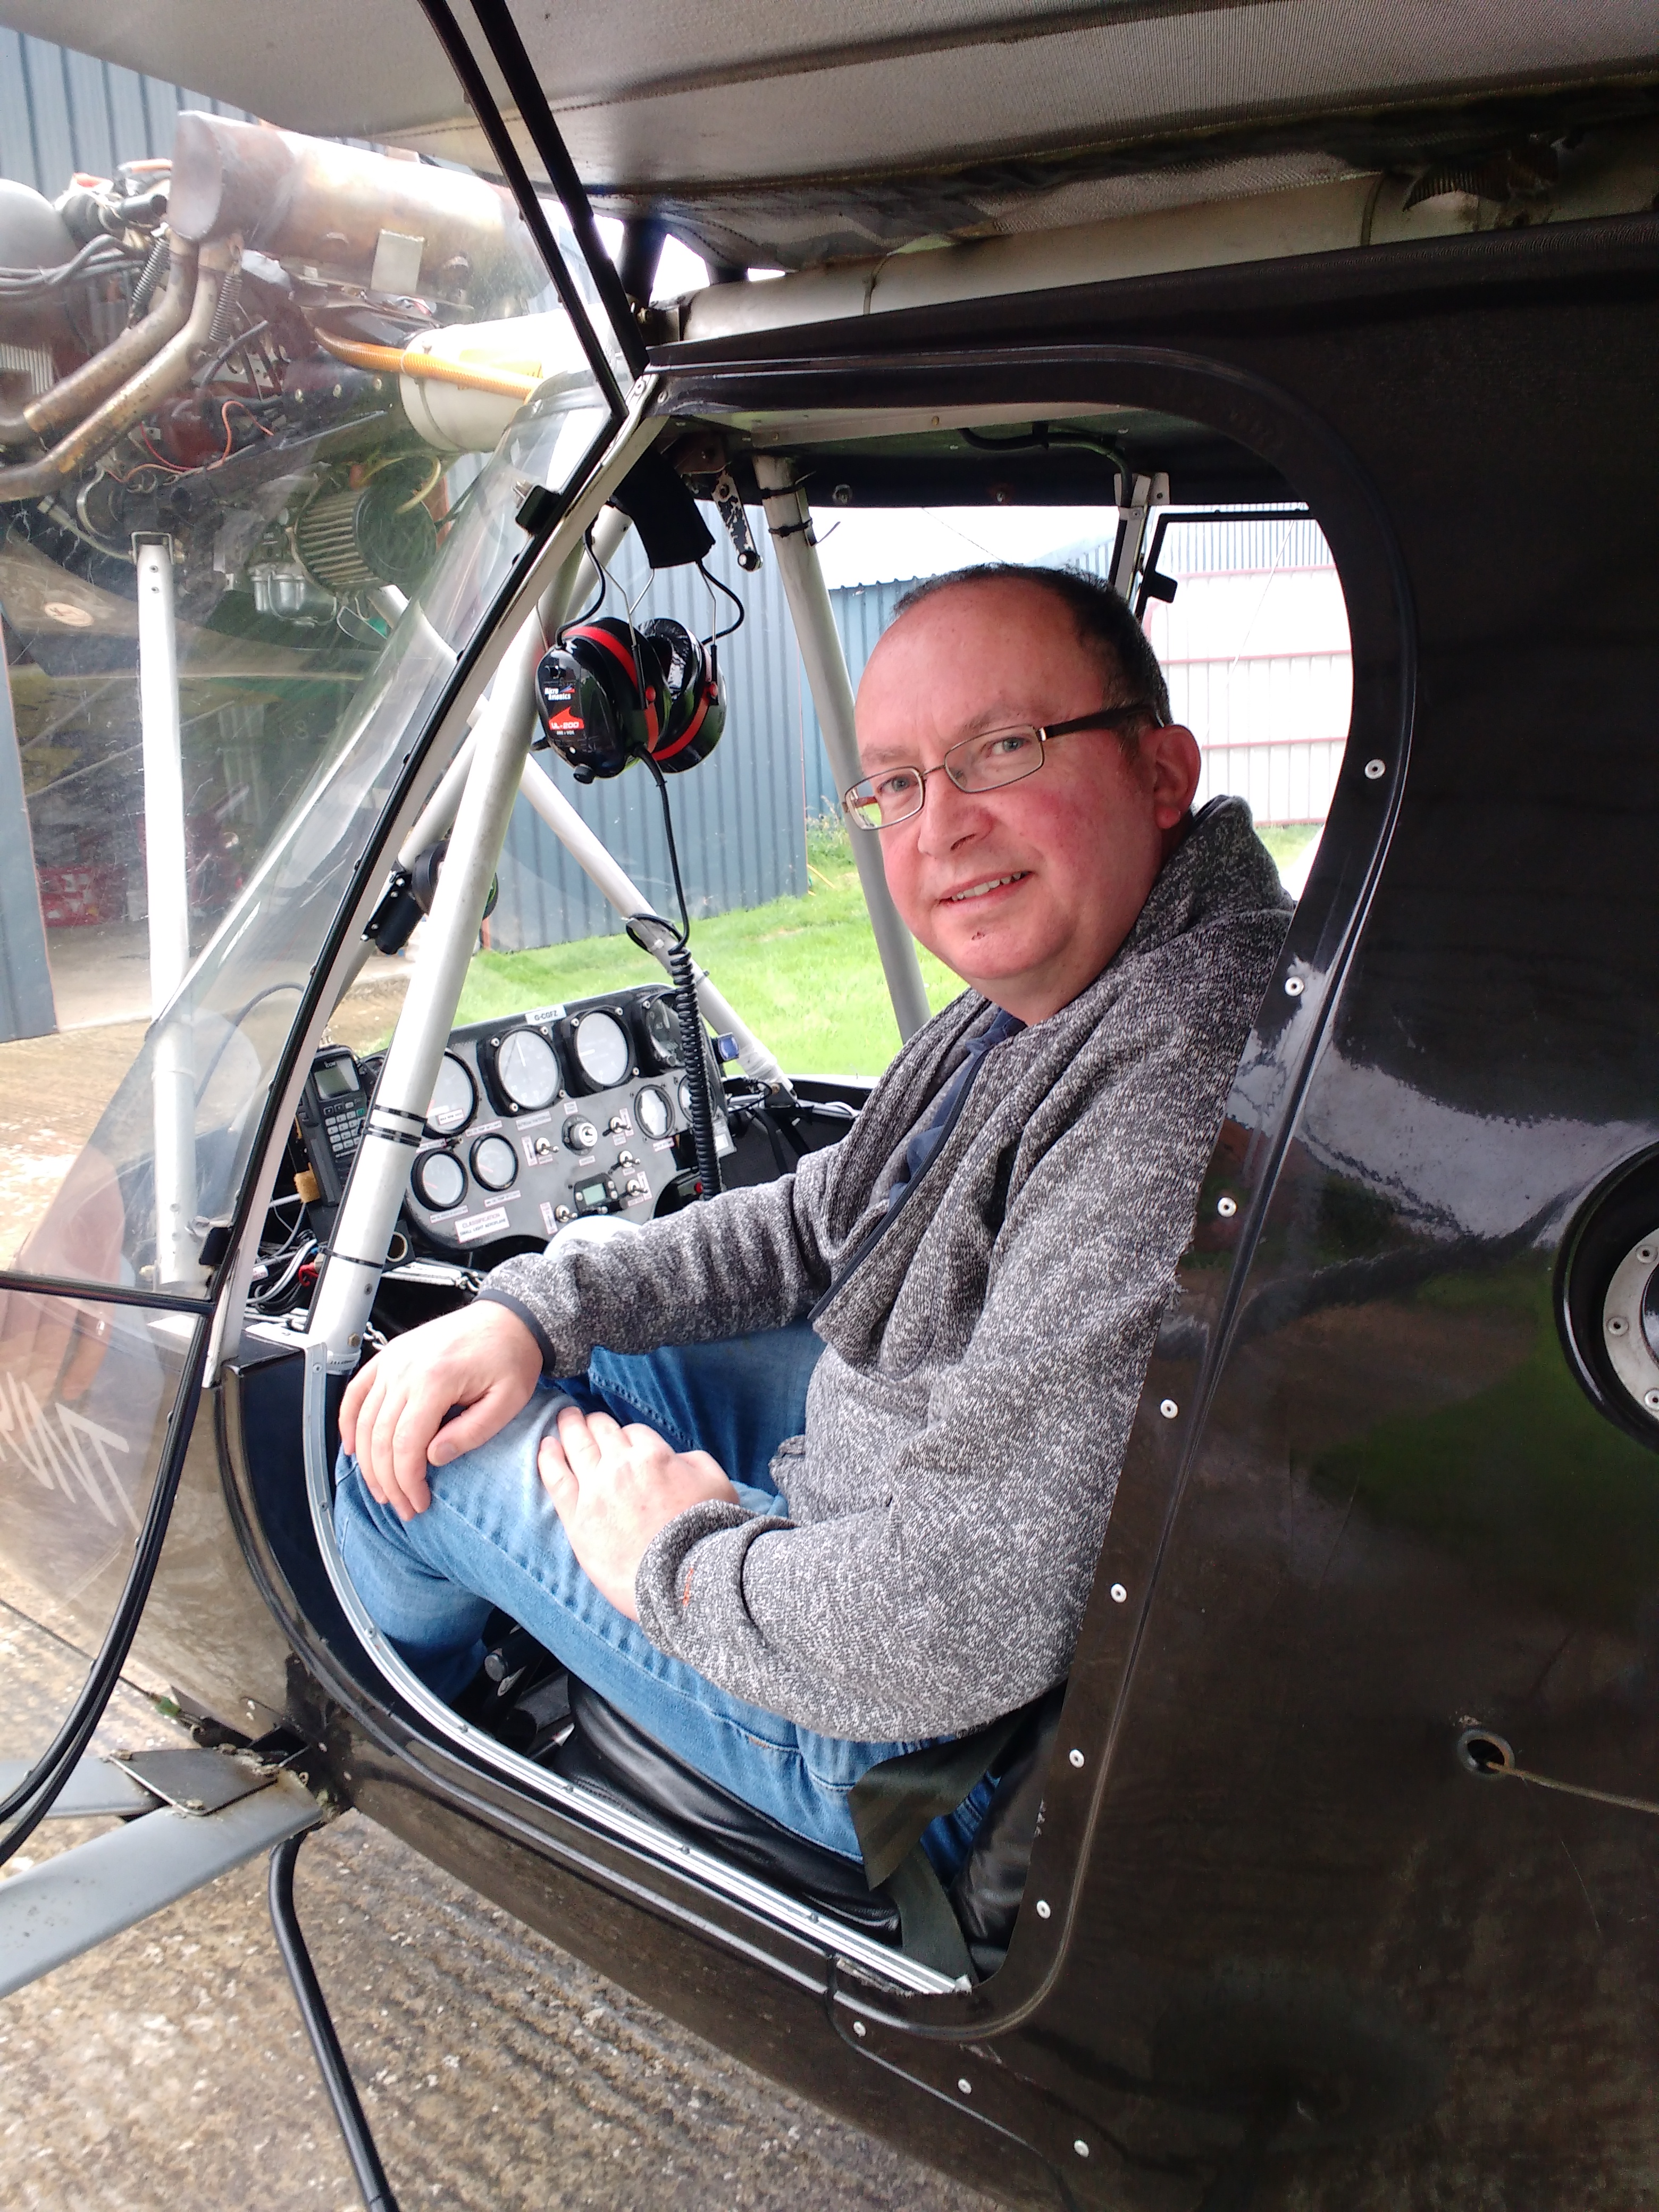 Gary Crosbie completes his first solo flight.